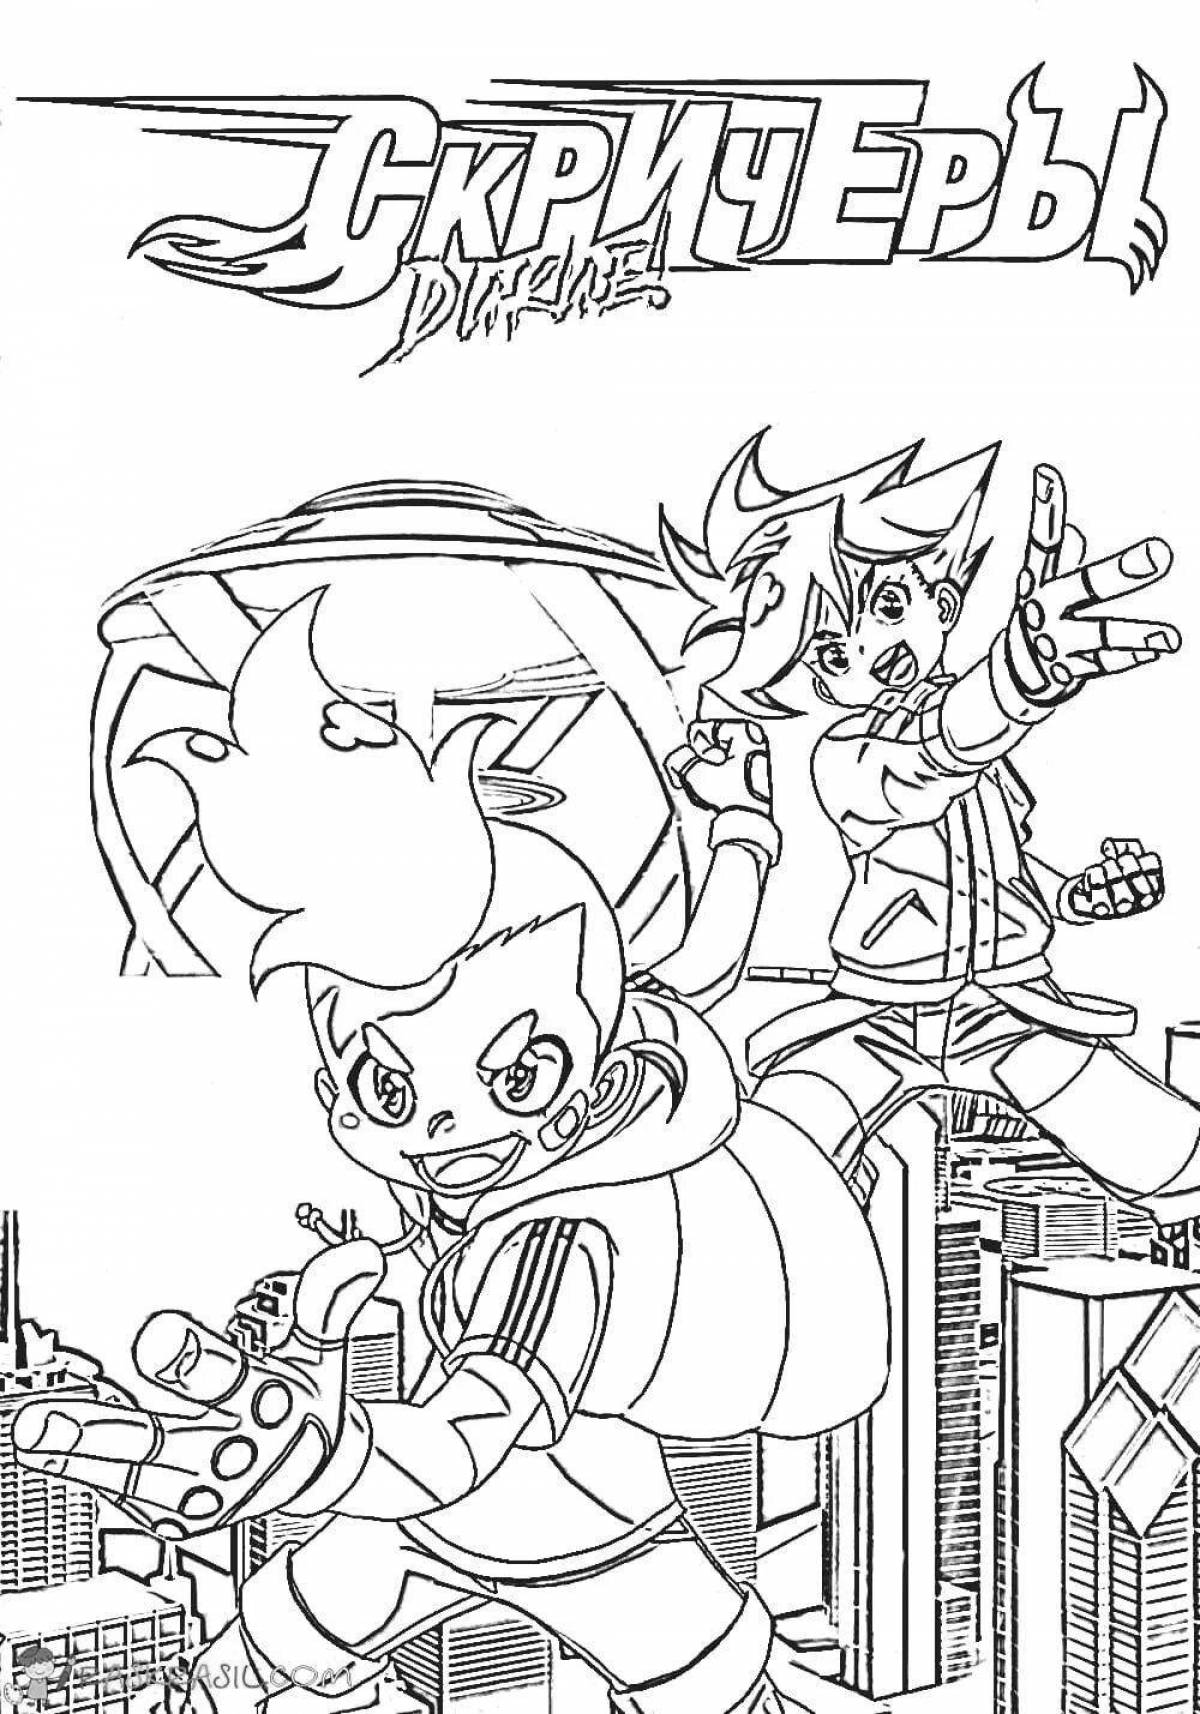 Charming wild screamers cerberus coloring page